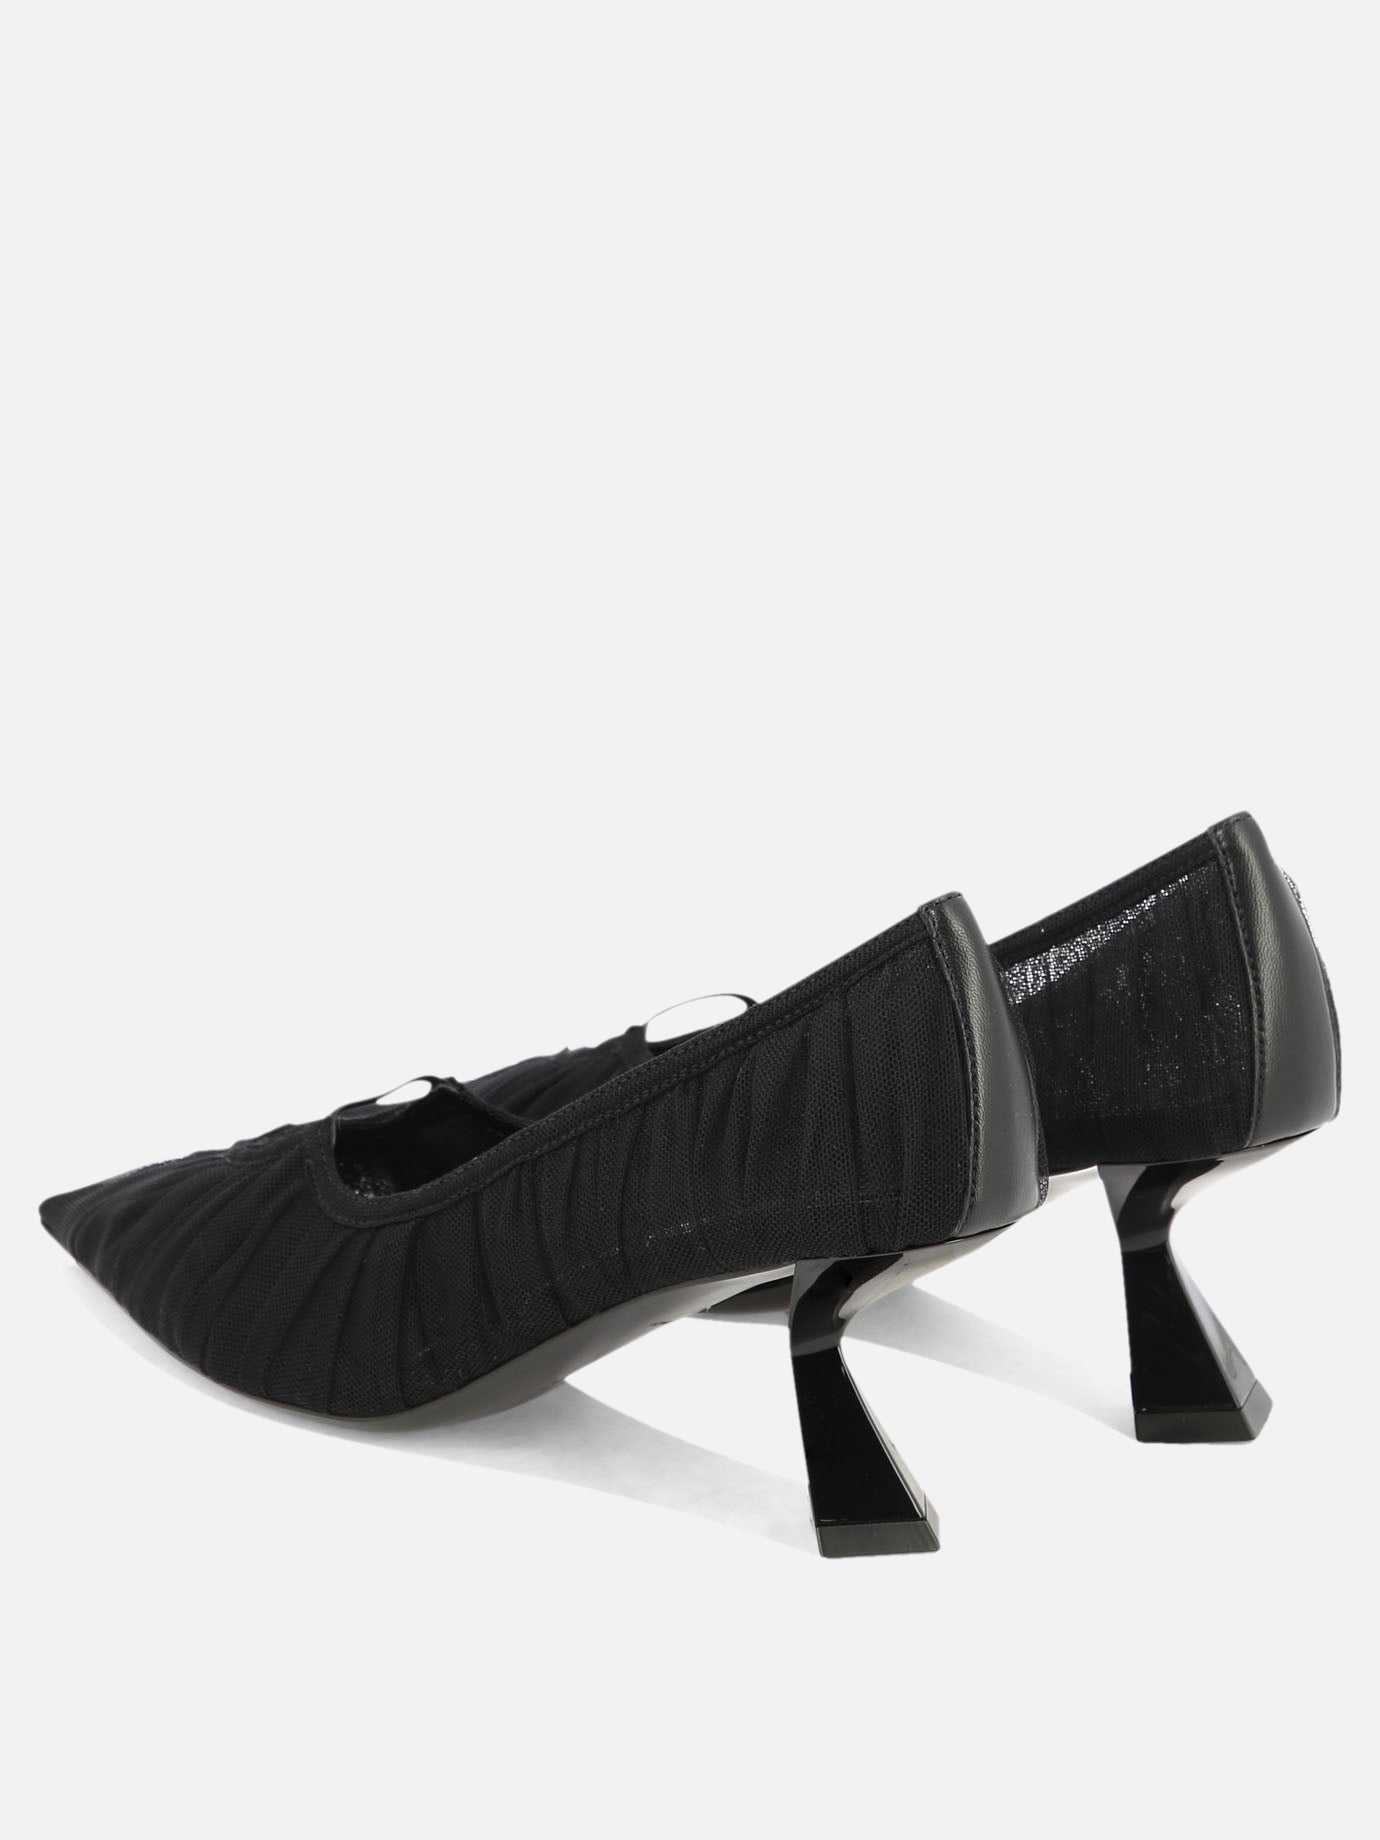 Tulle pumps